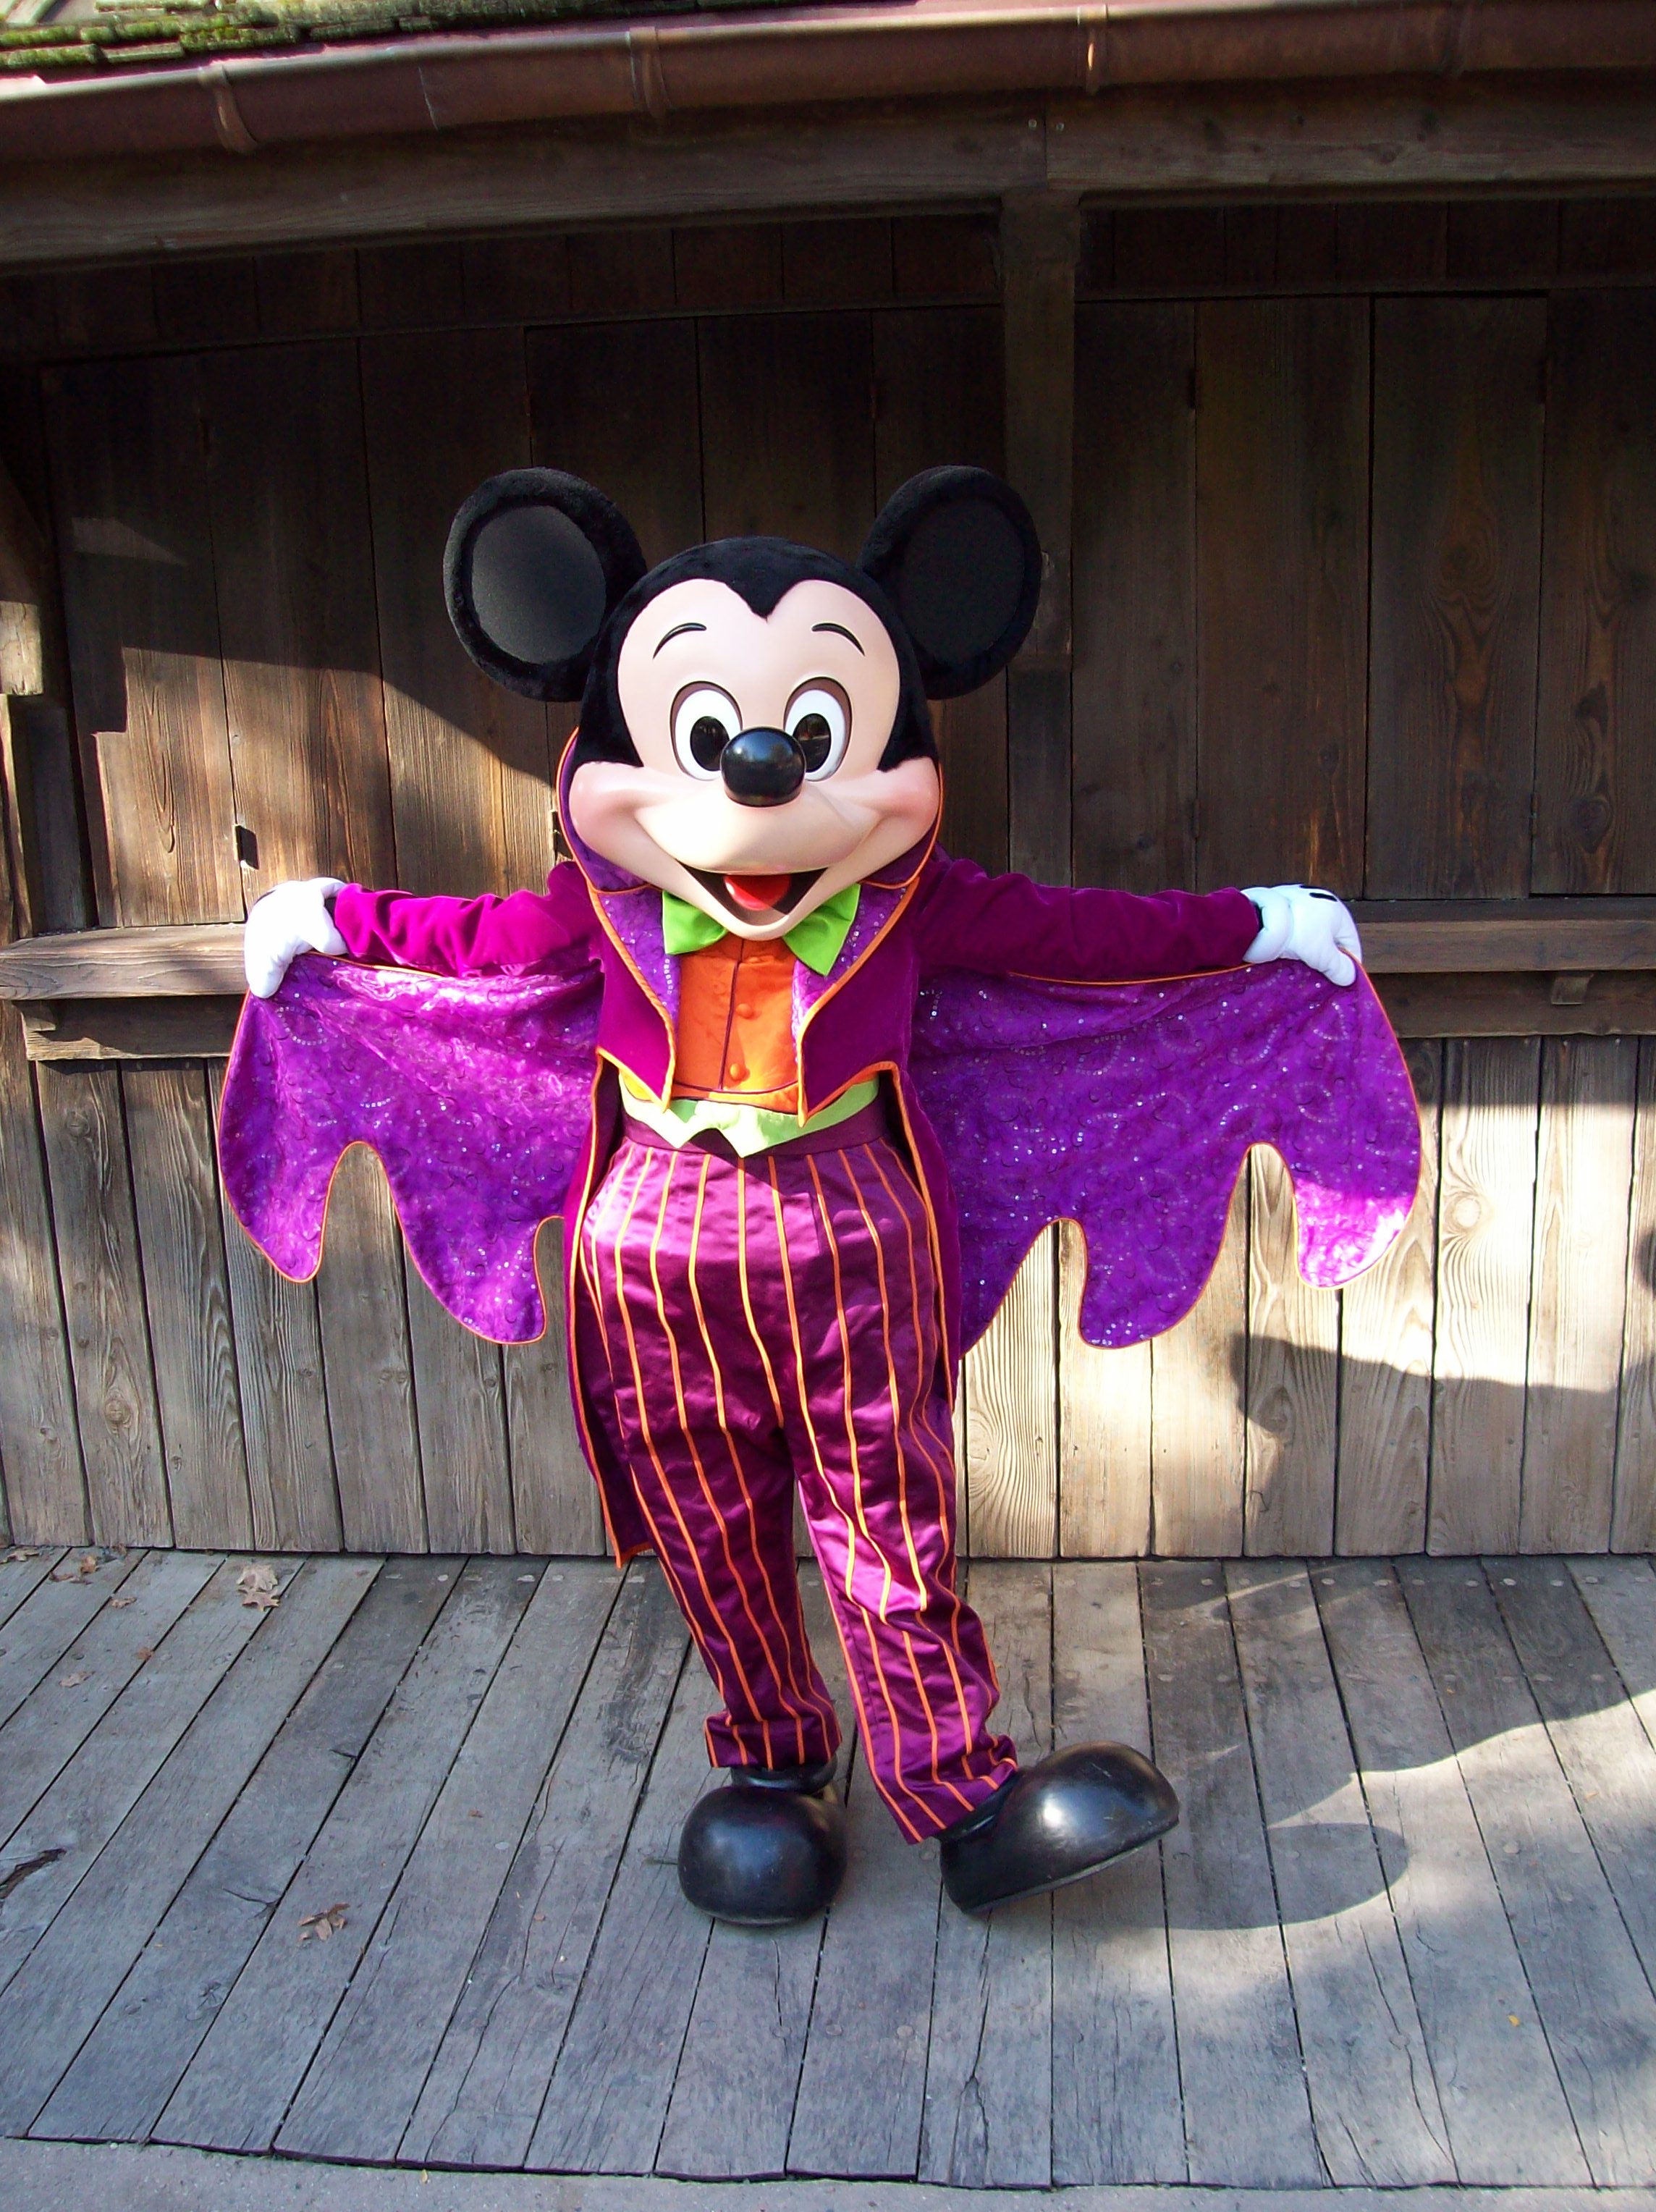 Mickey wearing his Halloween outfit at the Disneyland Park.